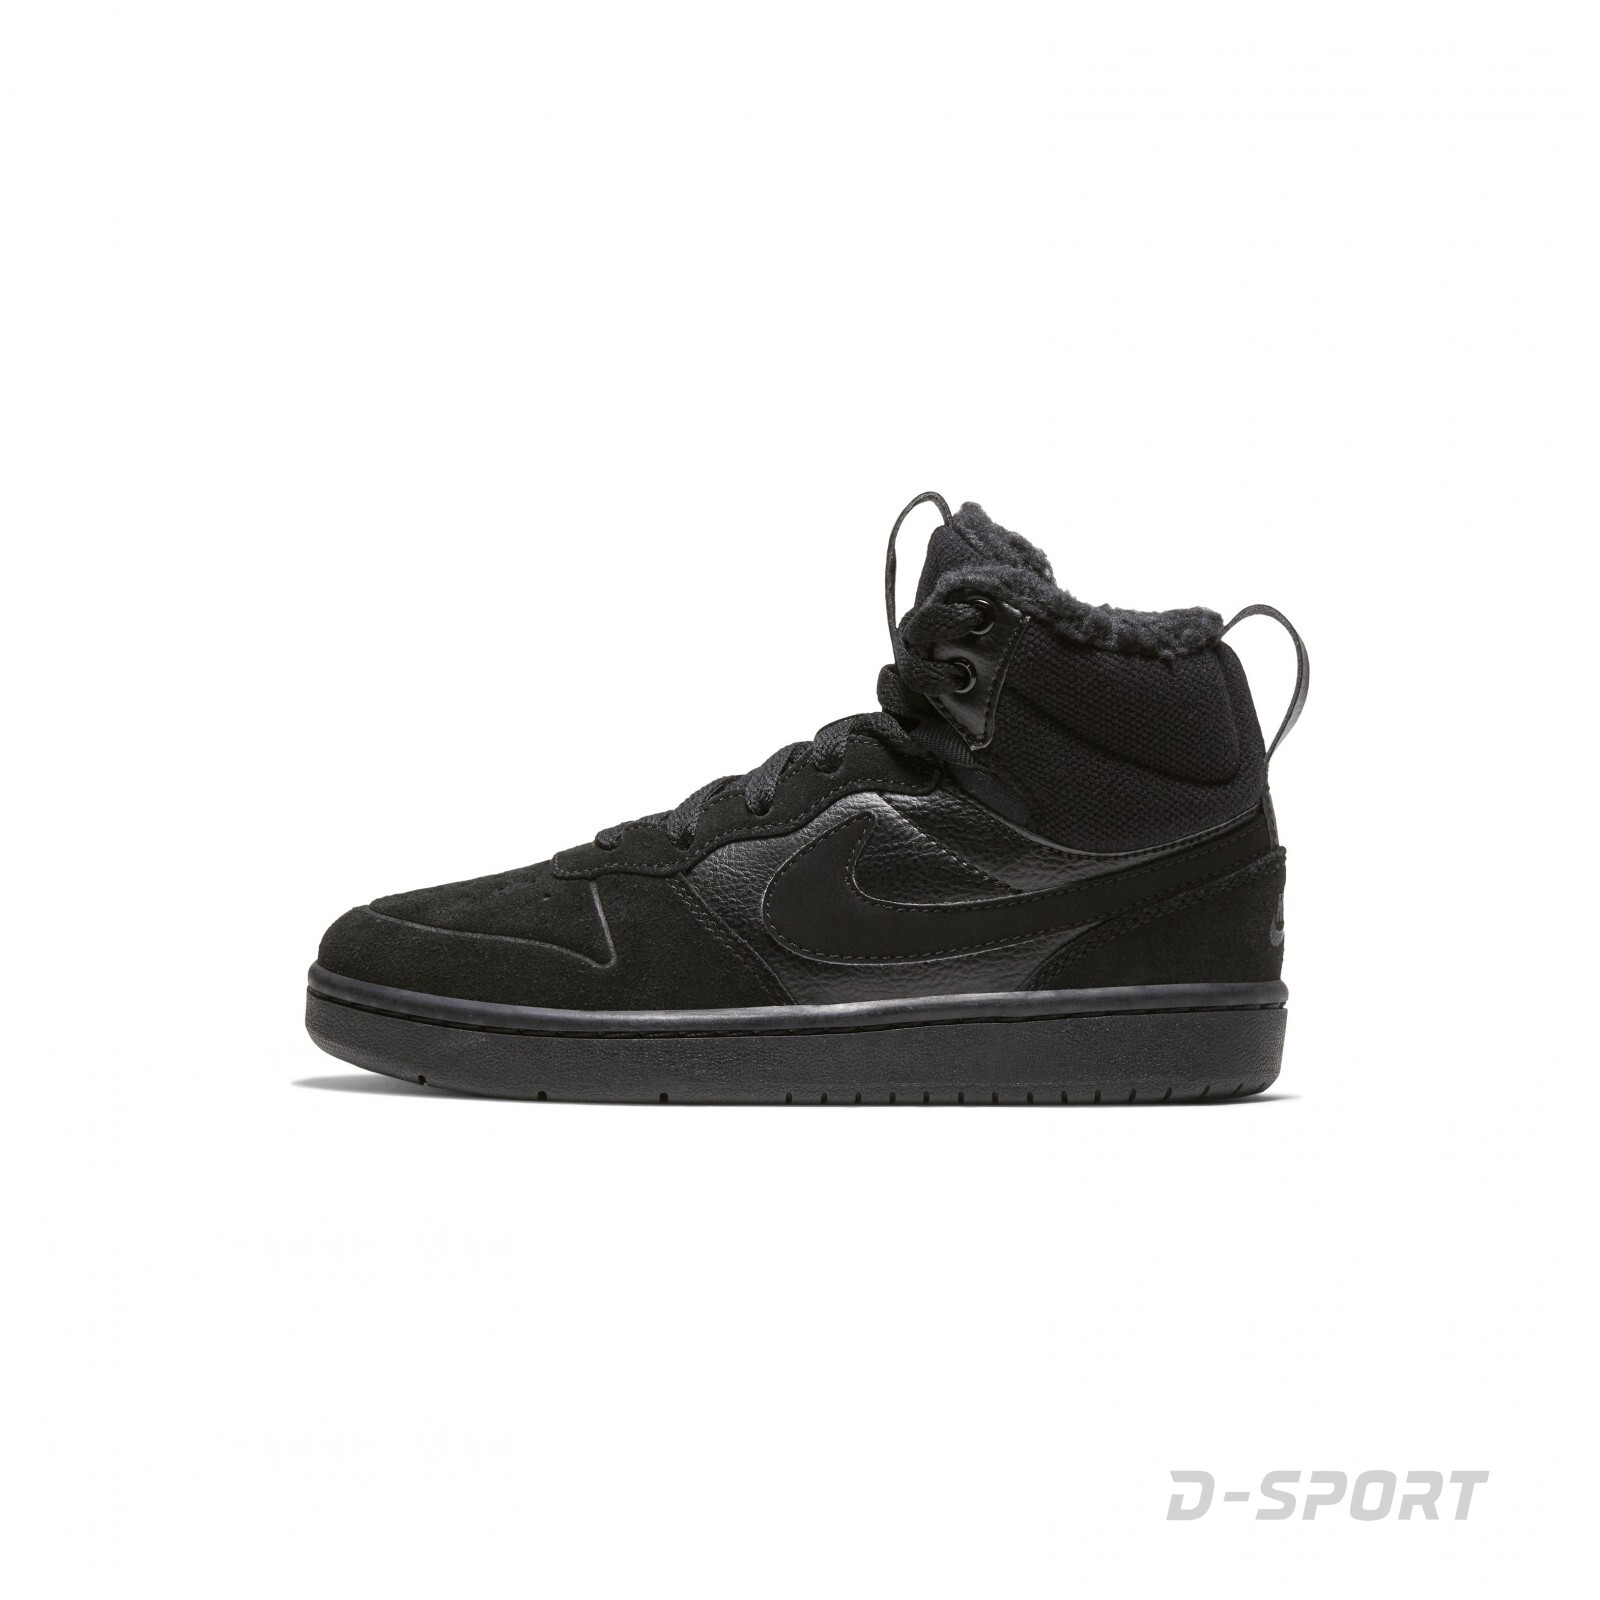 Nike COURT BOROUGH MID 2 BOOT PS